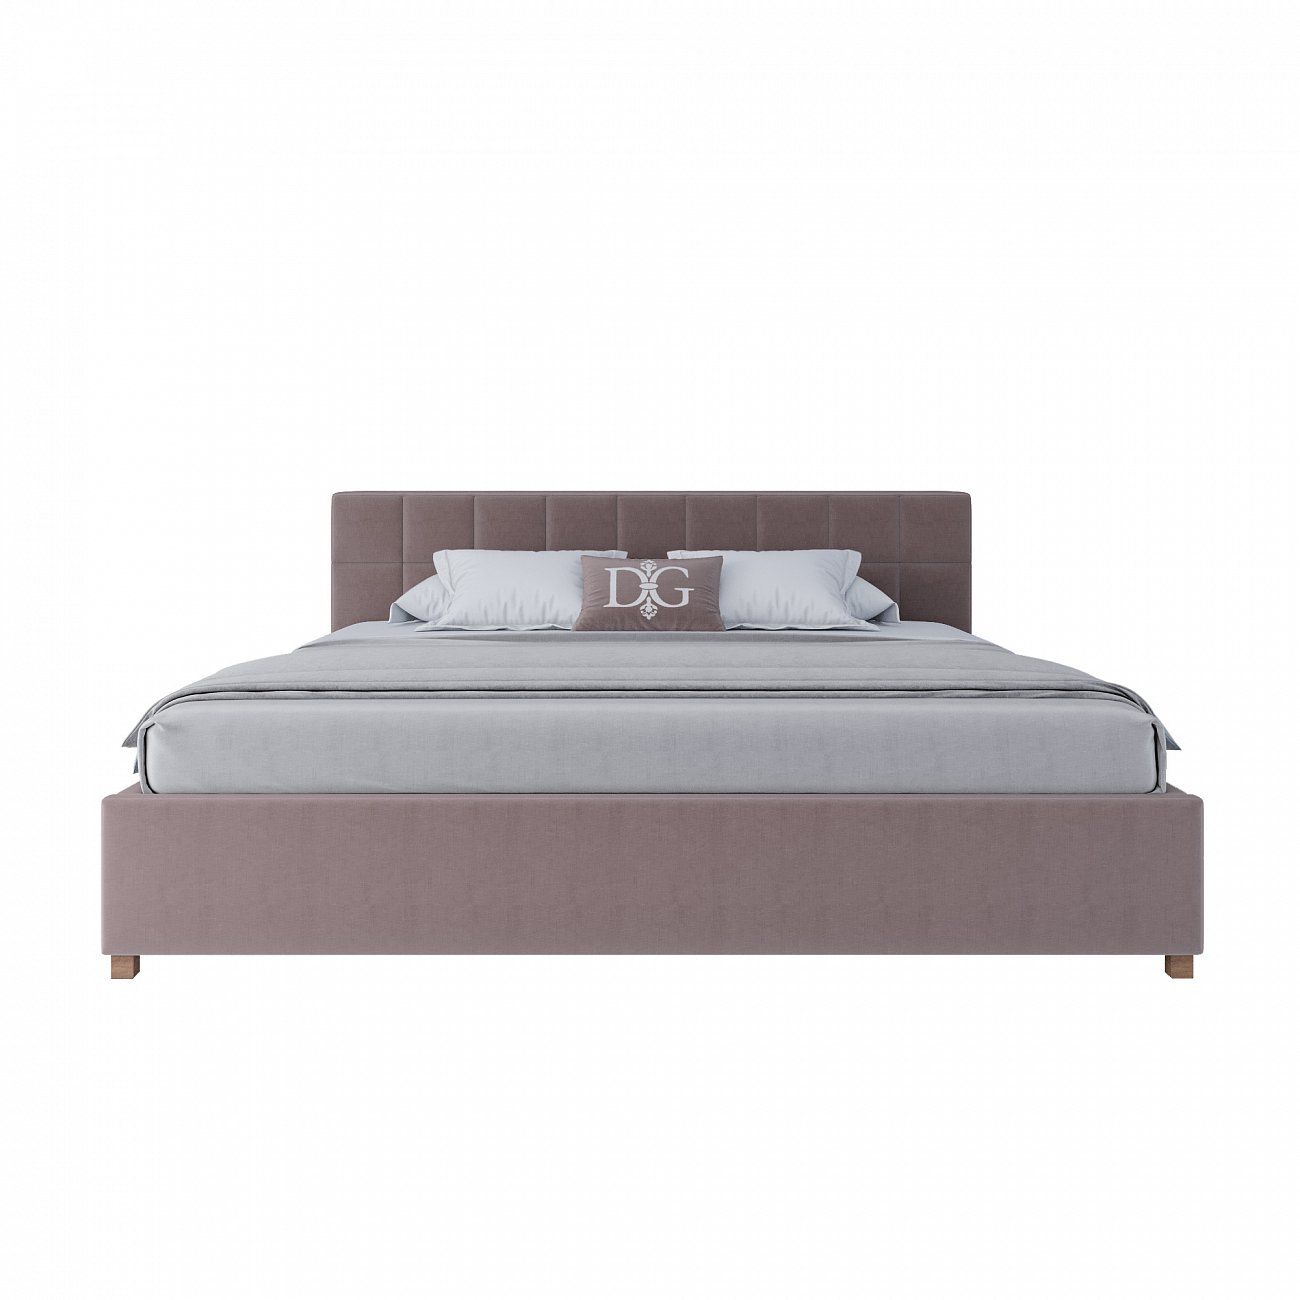 Euro bed 200x200 cm dusty rose Wales